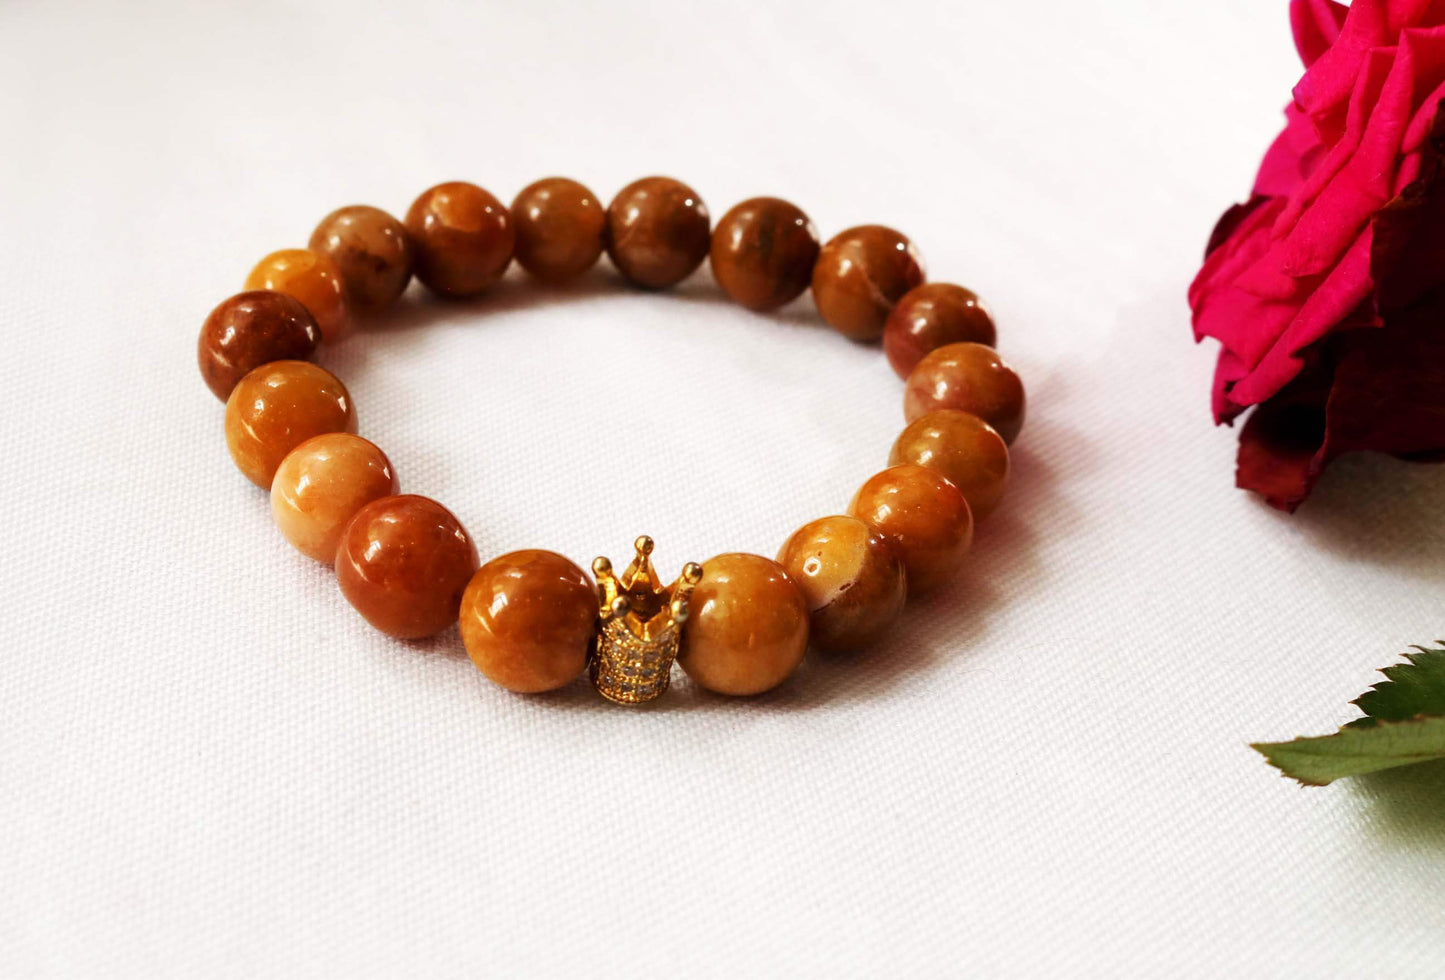 Beaded Bracelet Explore our exquisite gemstone collection, perfect for gifting on any occasion. Our Men's Mustard Gemstone Bracelet, featuring a regal crown design, is crafted with genuine mustard gemstones for a touch of sophistication. Treat him to timeless elegance. Shop now at Ethimaart.